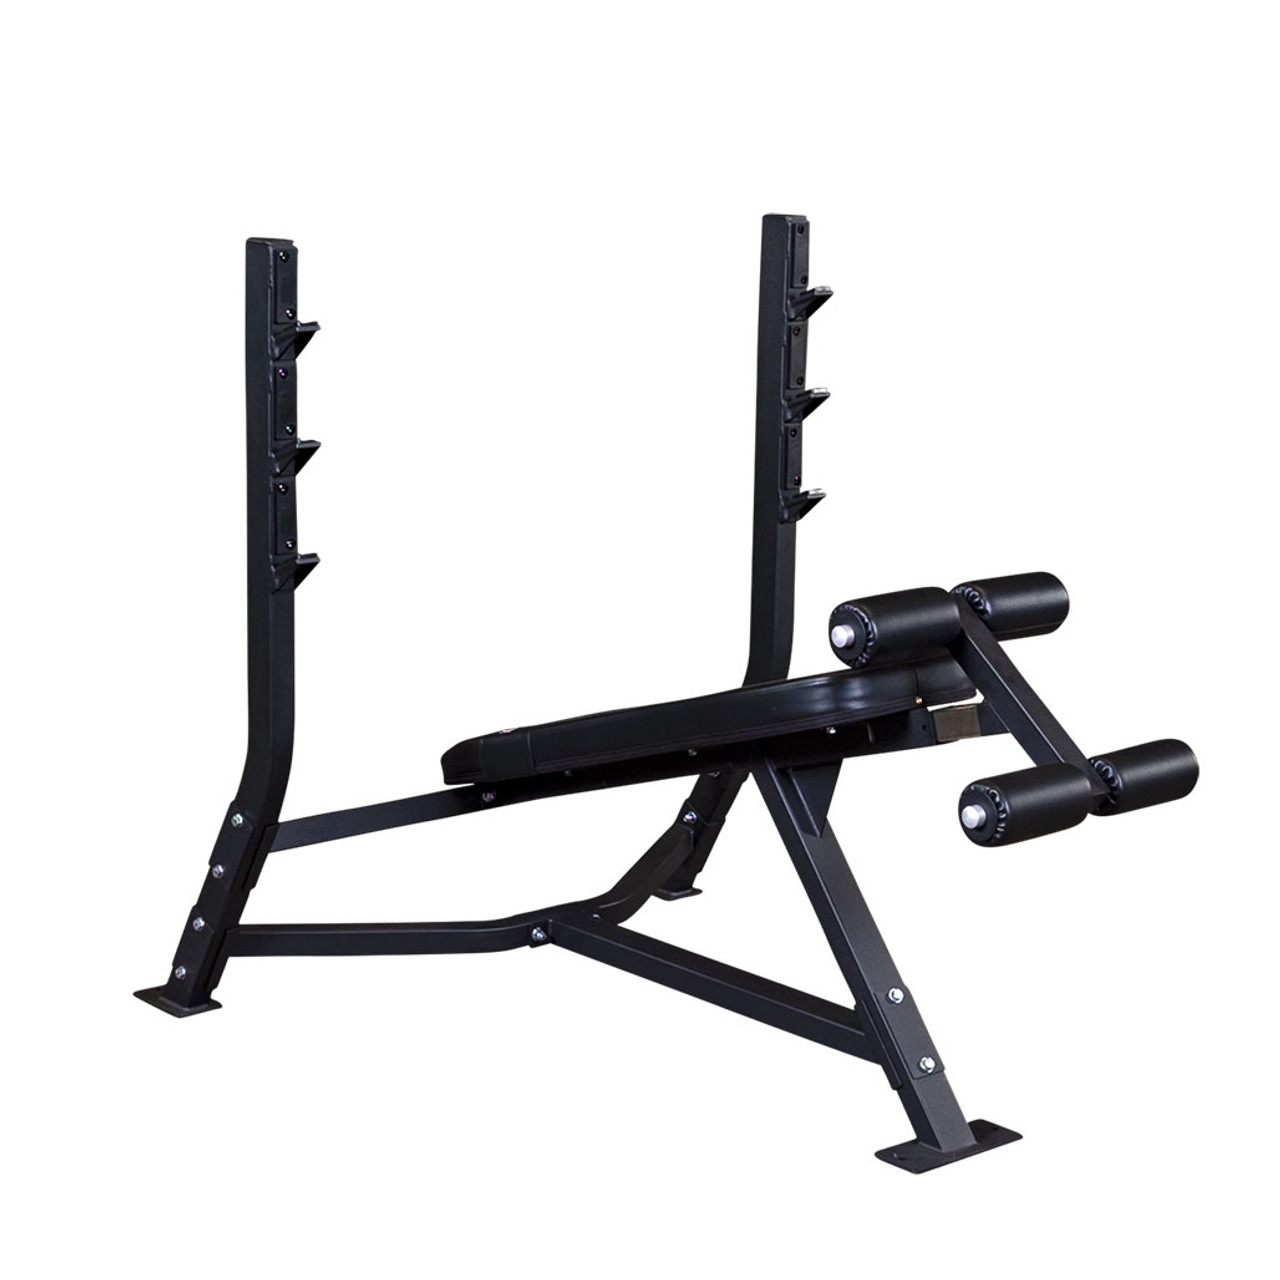 Pro Clubline Fixed Olympic Weight Benches SODB250 by Decline Body-Solid Bench 